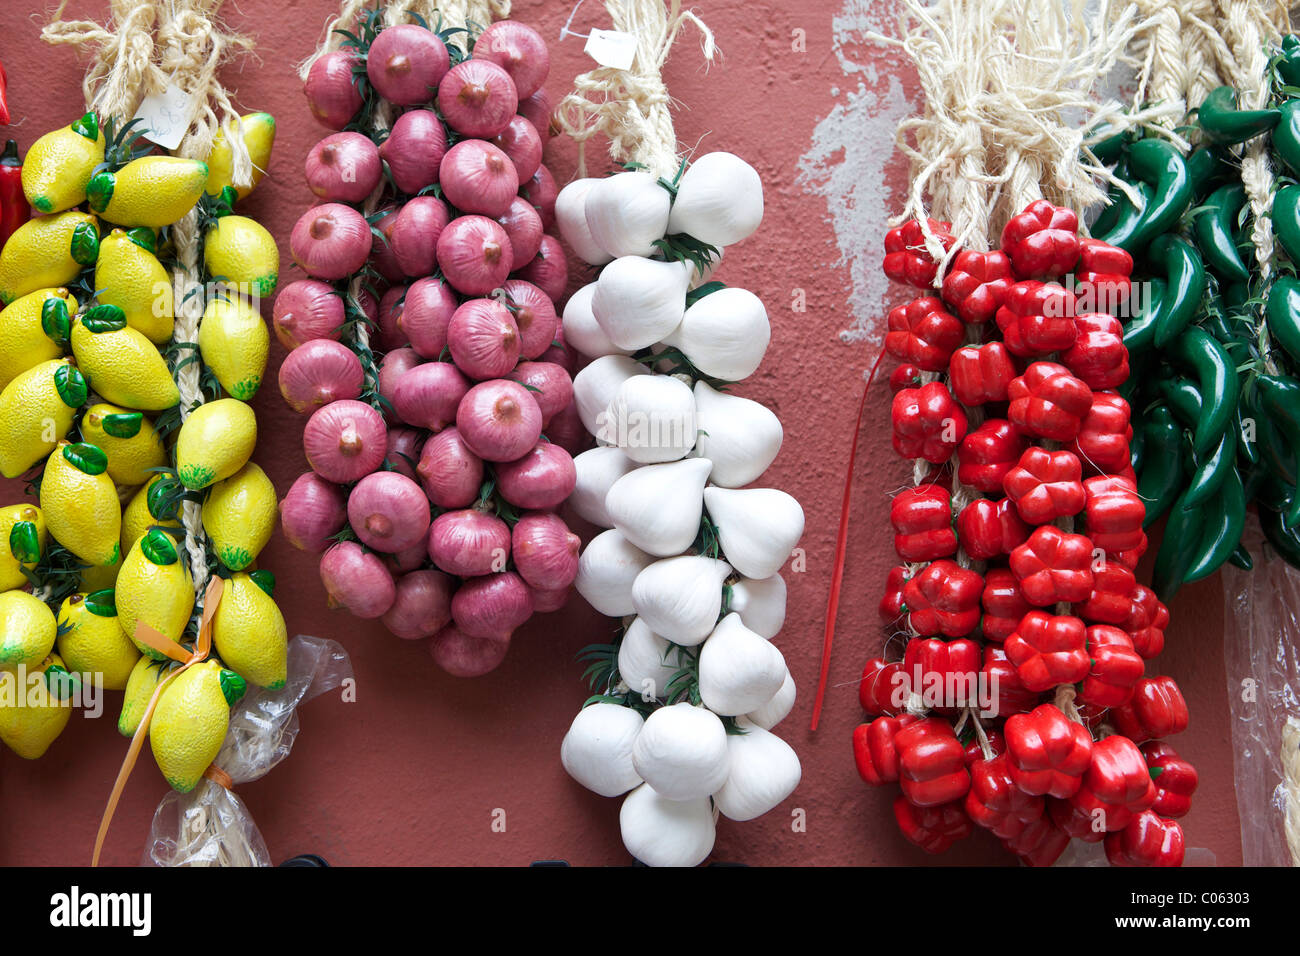 Freshly picked Lemons, Onions, Garlic, Red Peppers and Green Chillis hanging on the vine, for sale outside a store in Italy. A colorful display. Stock Photo